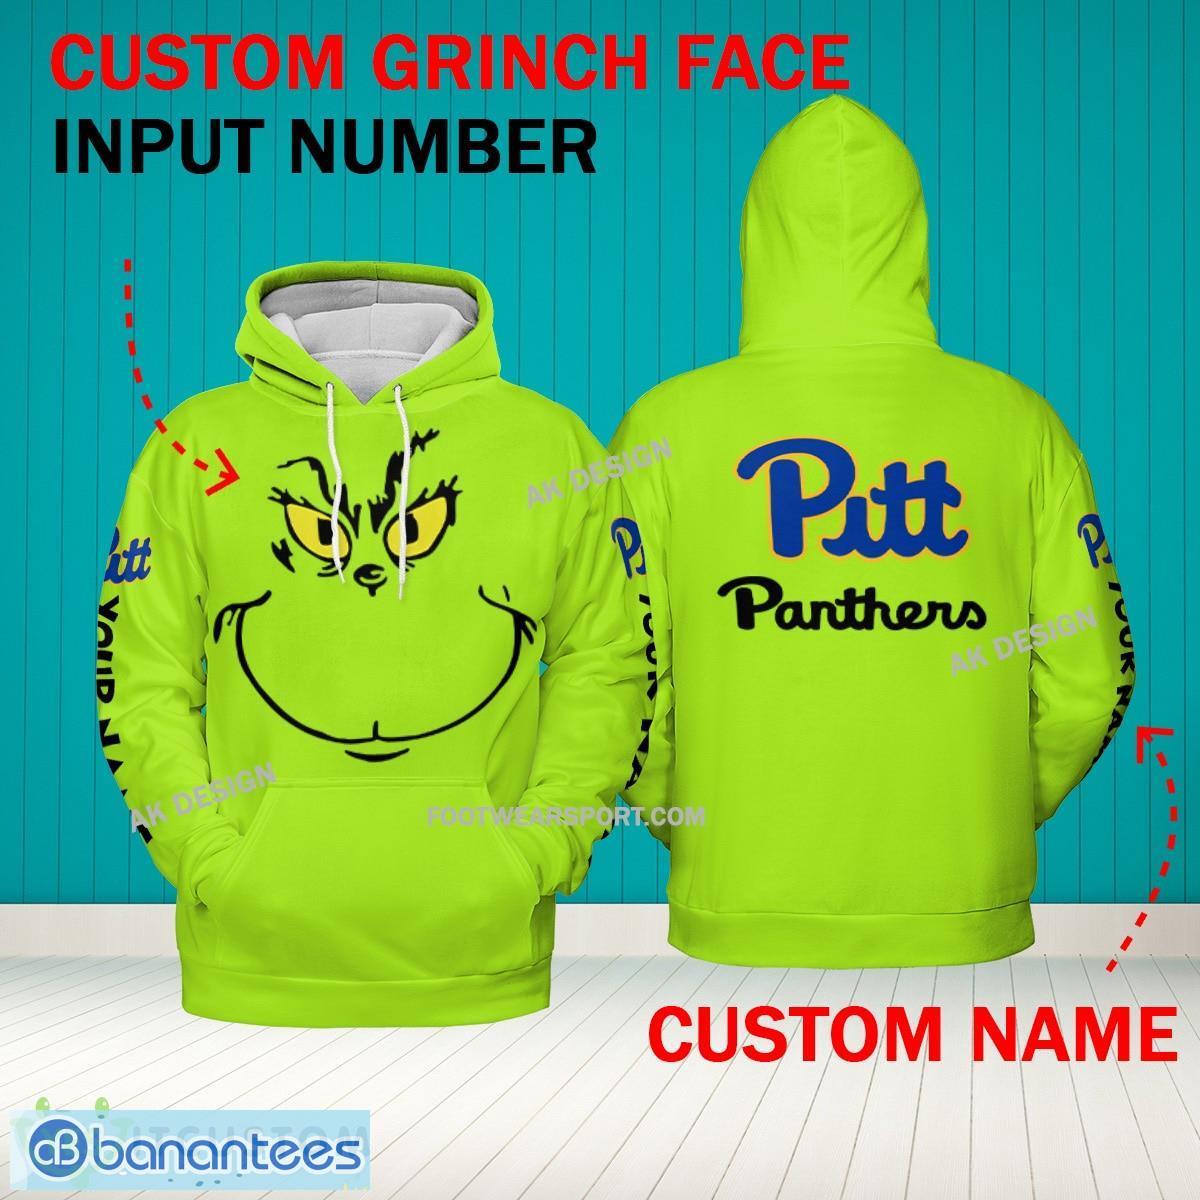 Grinch Face Pittsburgh Panthers 3D Hoodie, Zip Hoodie, Sweater Green AOP Custom Number And Name - Grinch Face NCAA Pittsburgh Panthers 3D Hoodie